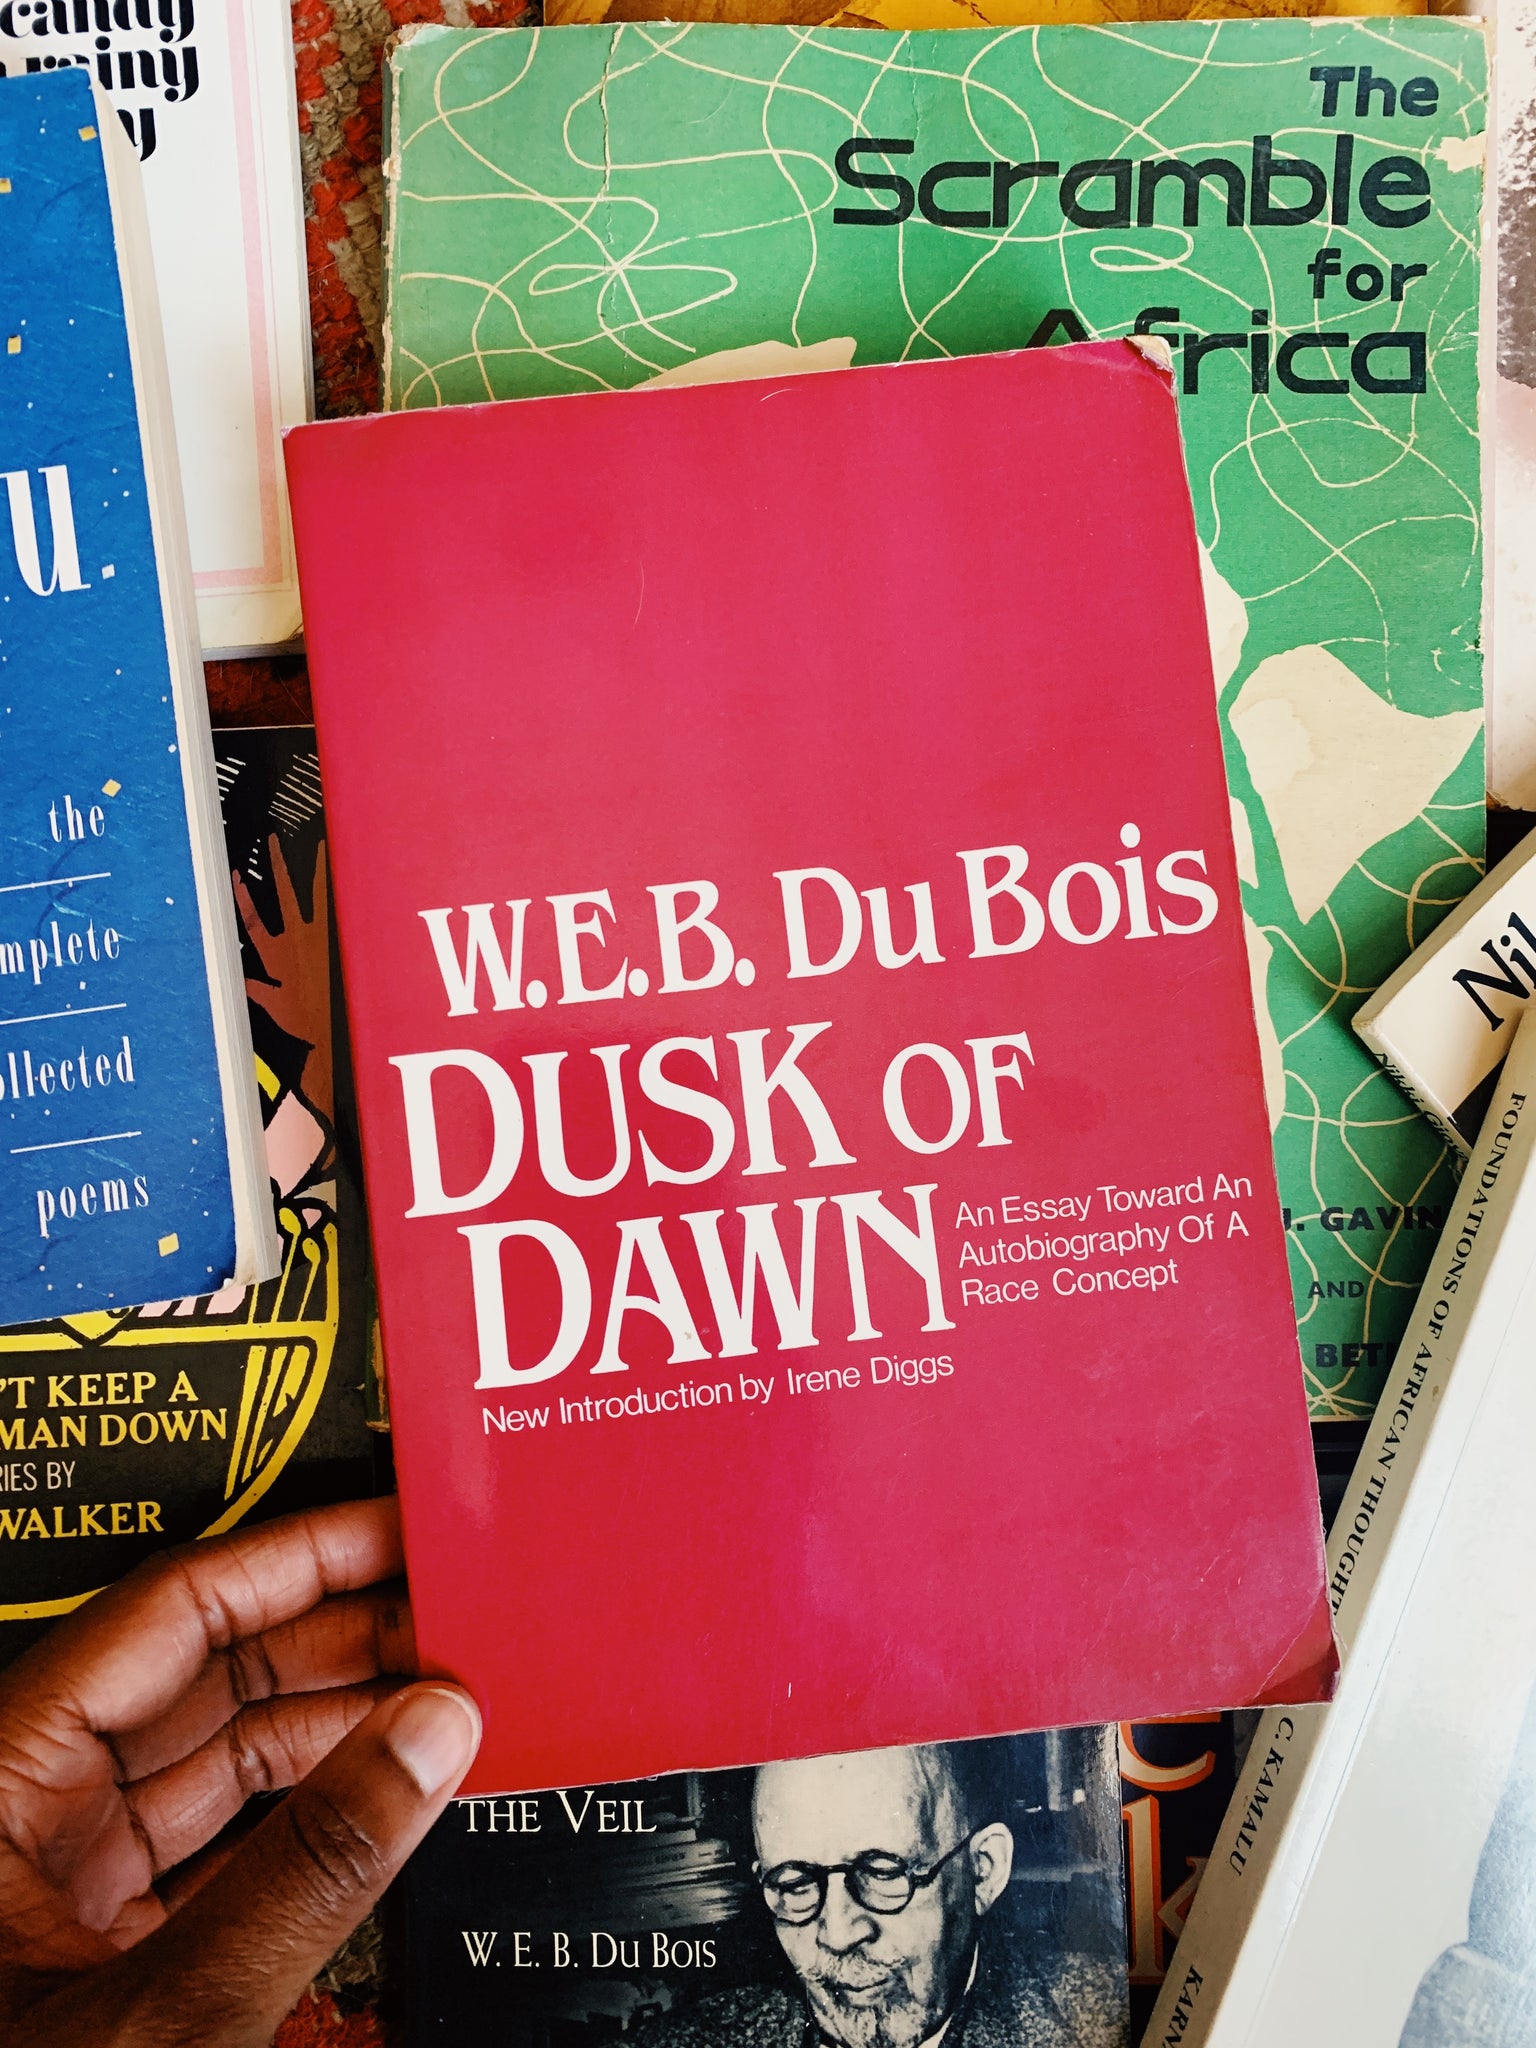 Vintage Softcover "Dusk of Dawn: An Essay Toward an Autobiography of a Race Concept” by W.E.B. DuBois (1984)